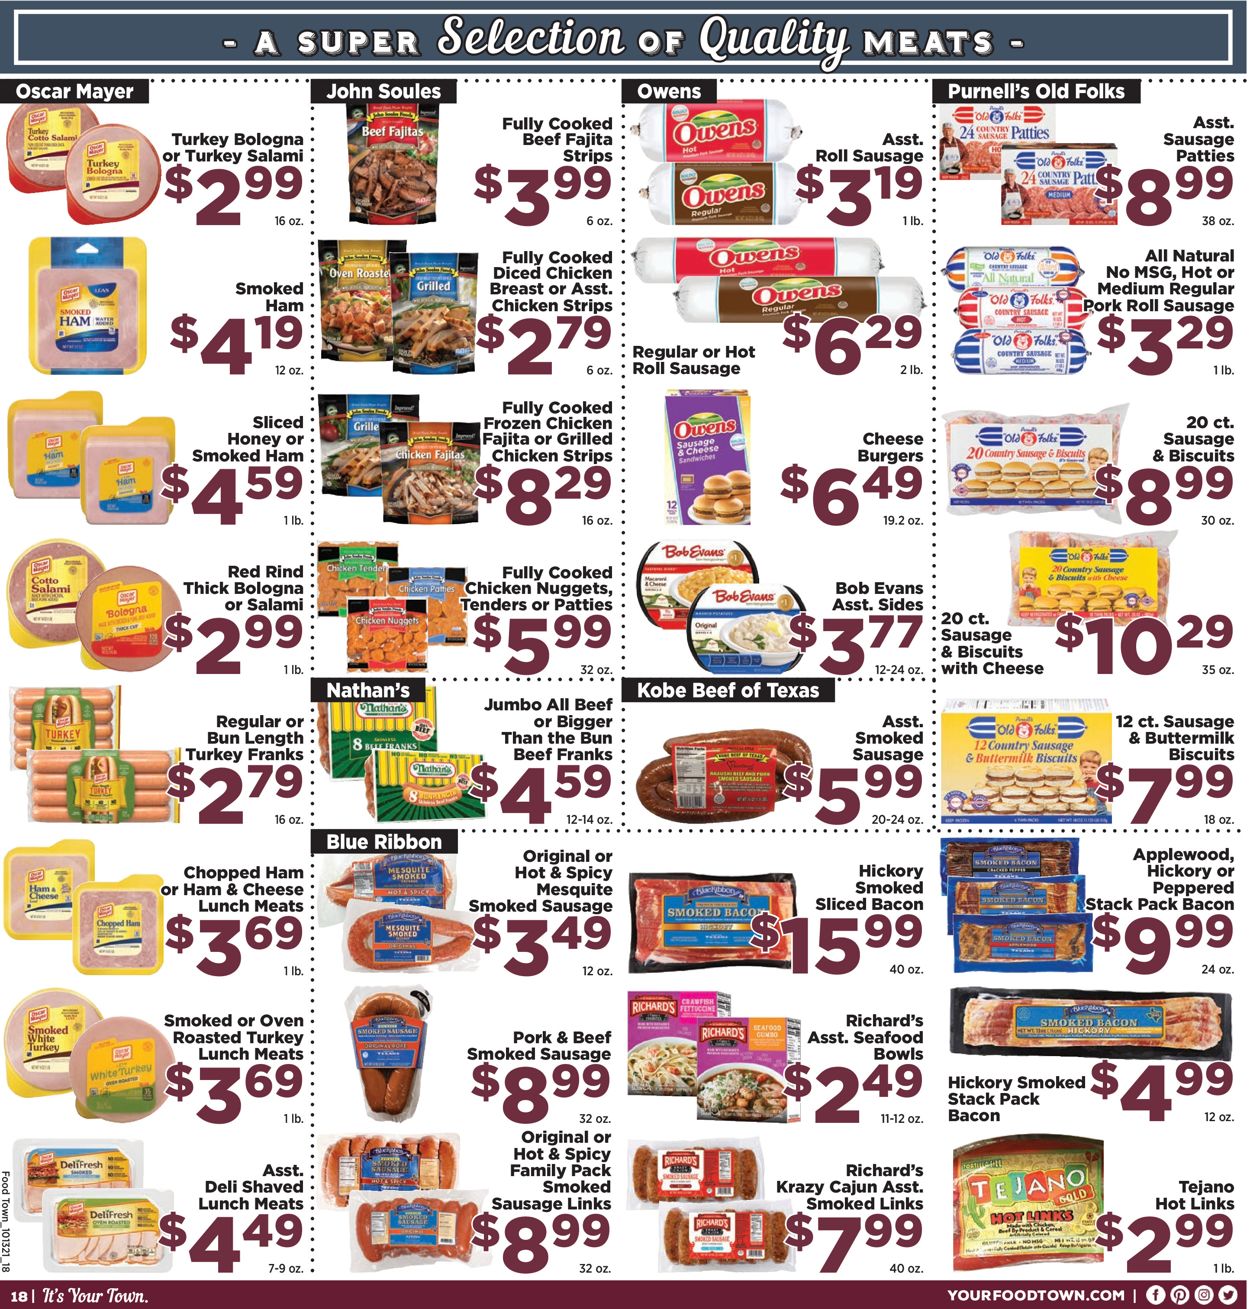 Food Town Ad from 10/13/2021